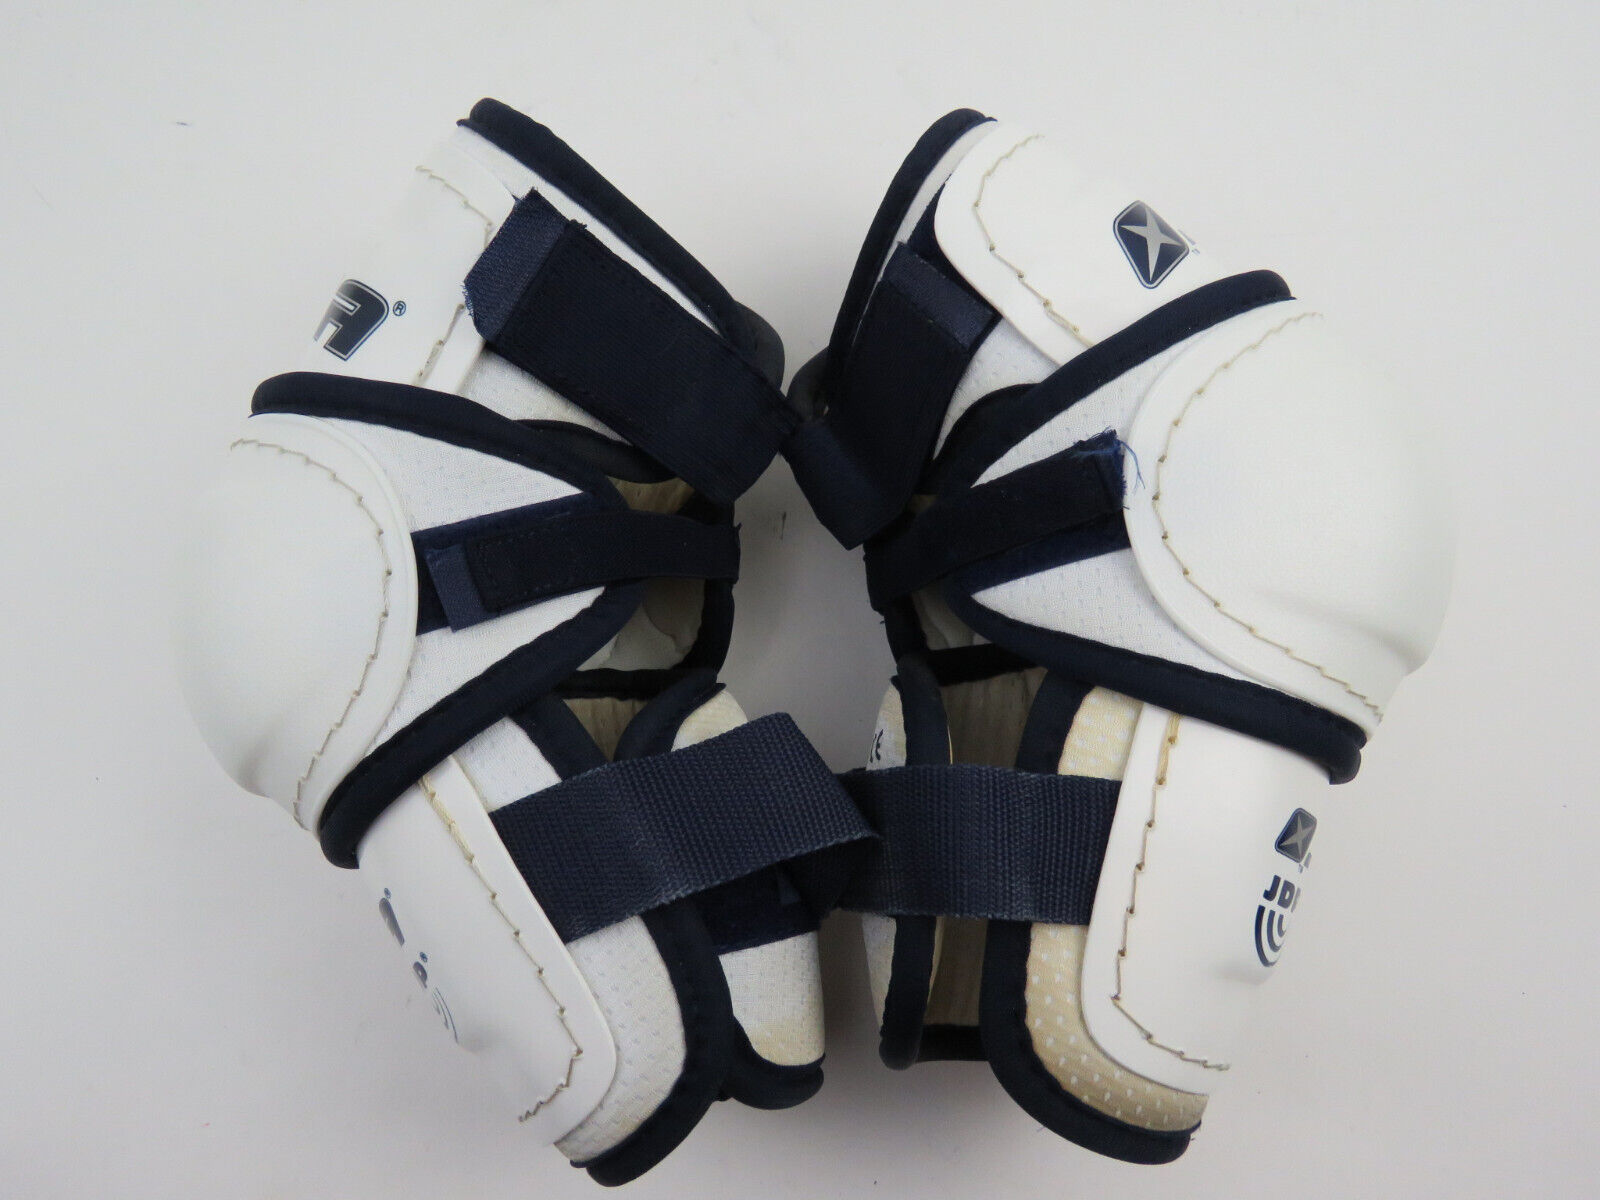 JOFA 8066 NHL Pro Stock Ice Hockey Player Elbow Pads Protective Size 6 Large